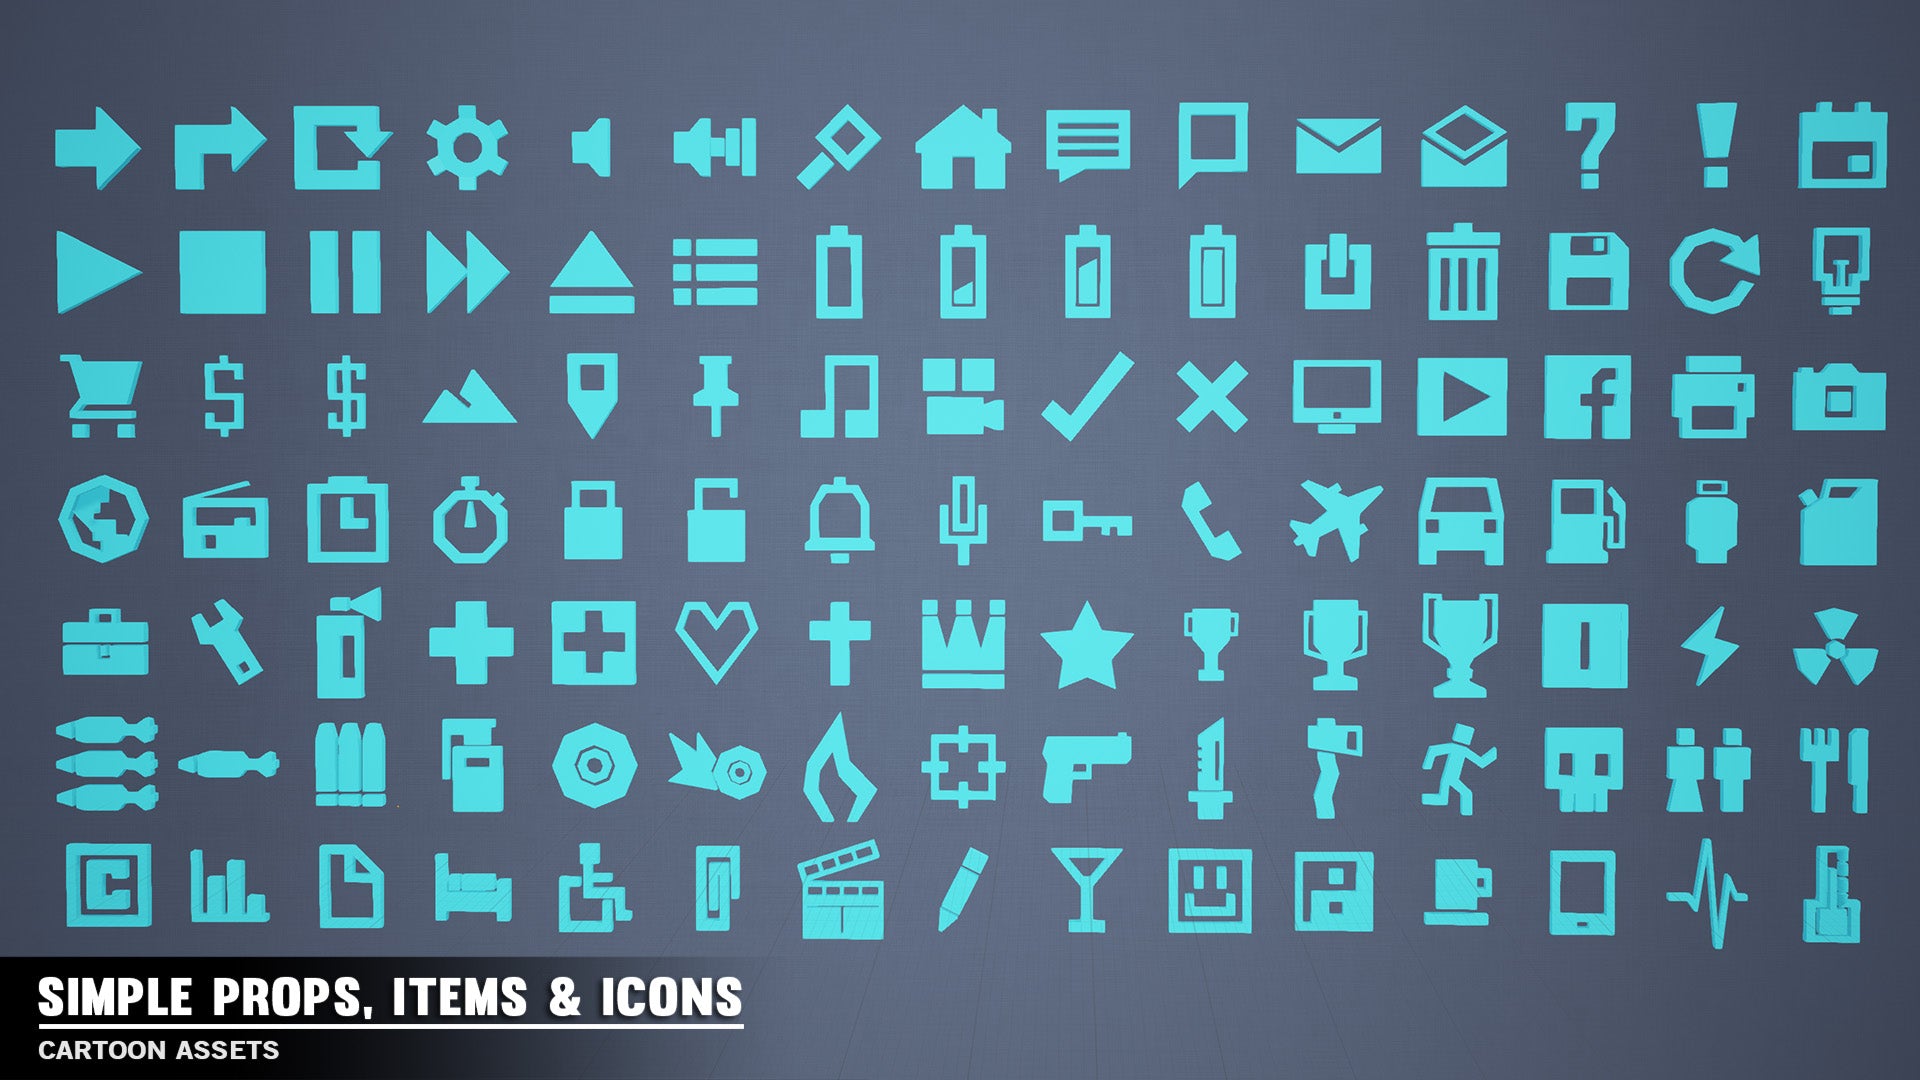 Simple Props/Items/Icons - Cartoon Assets - Synty Studios - Unity and Unreal 3D low poly assets for game development